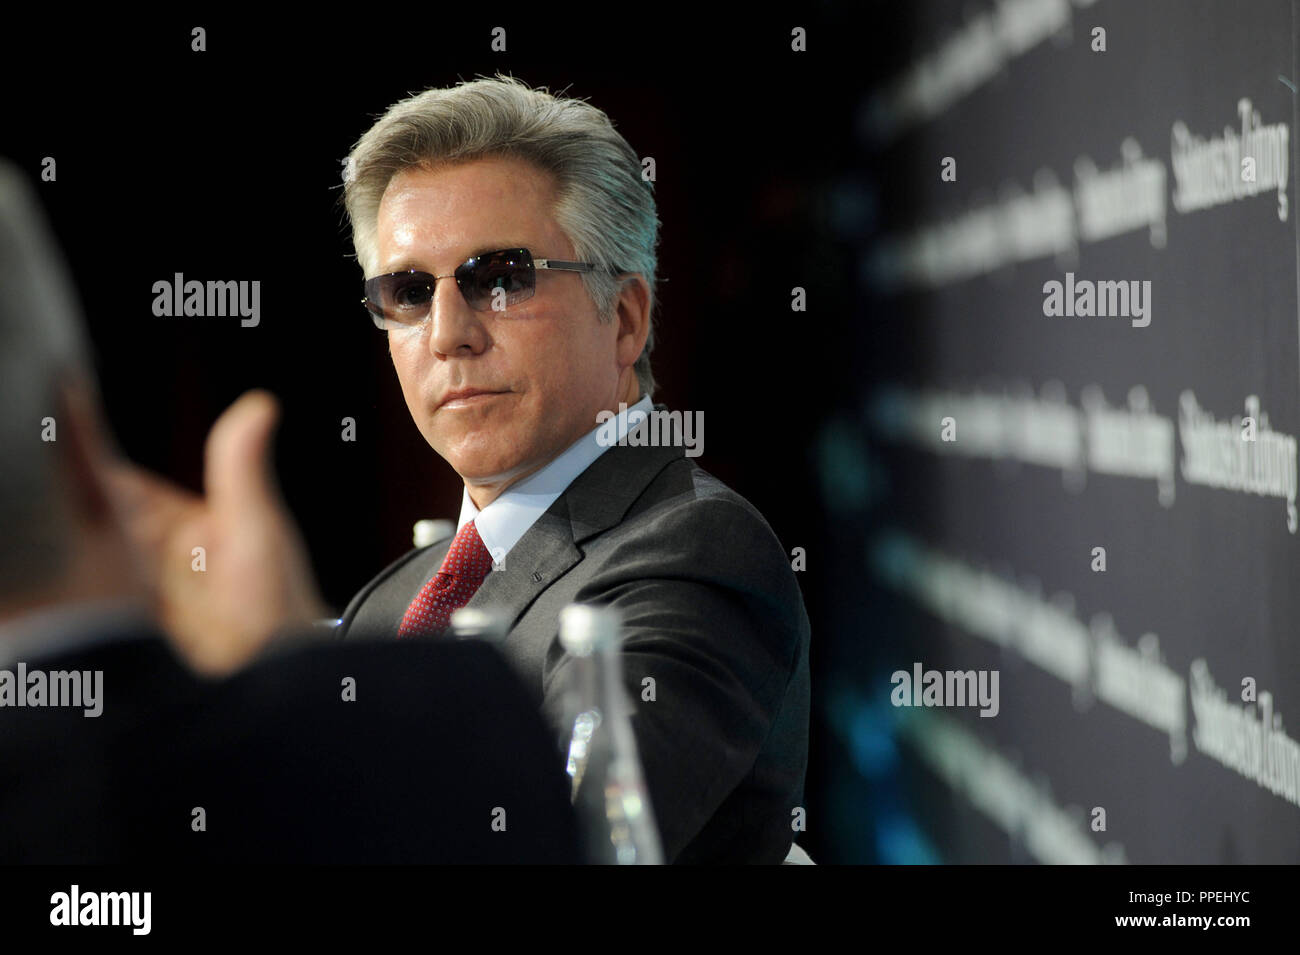 Bill McDermott, American Manager, Chief Executive Officer of SAP SE, at the Economic Summit of the Sueddeutsche Zeitung in the Hotel Adlon in Berlin. Stock Photo